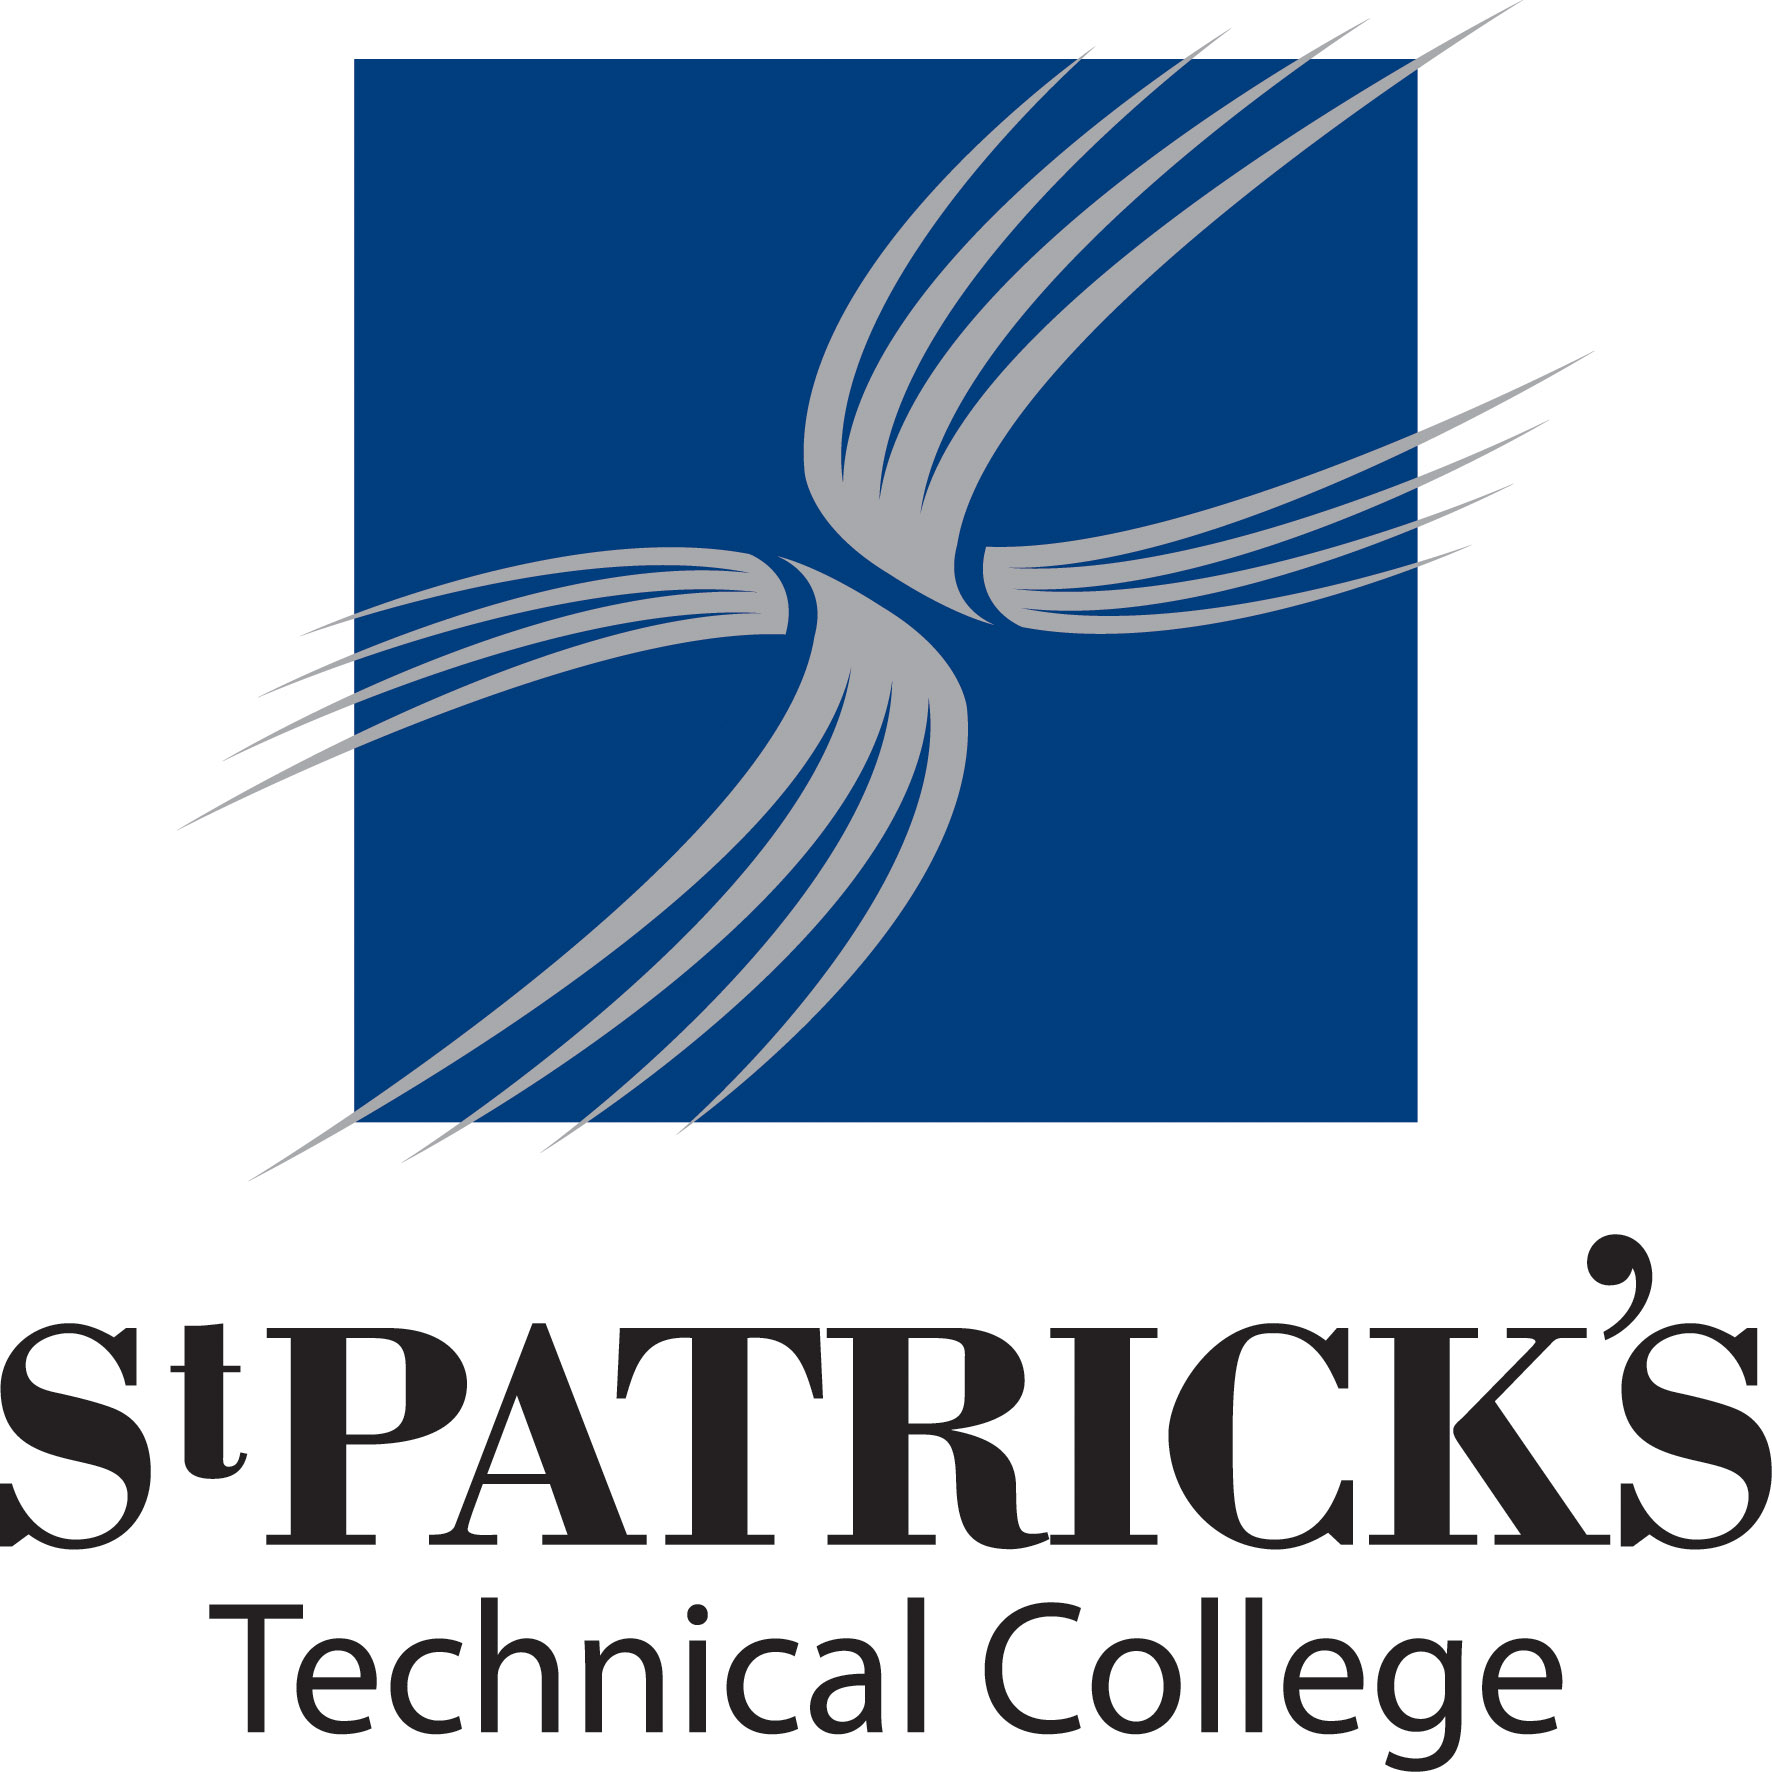 St Patrick's Technical College